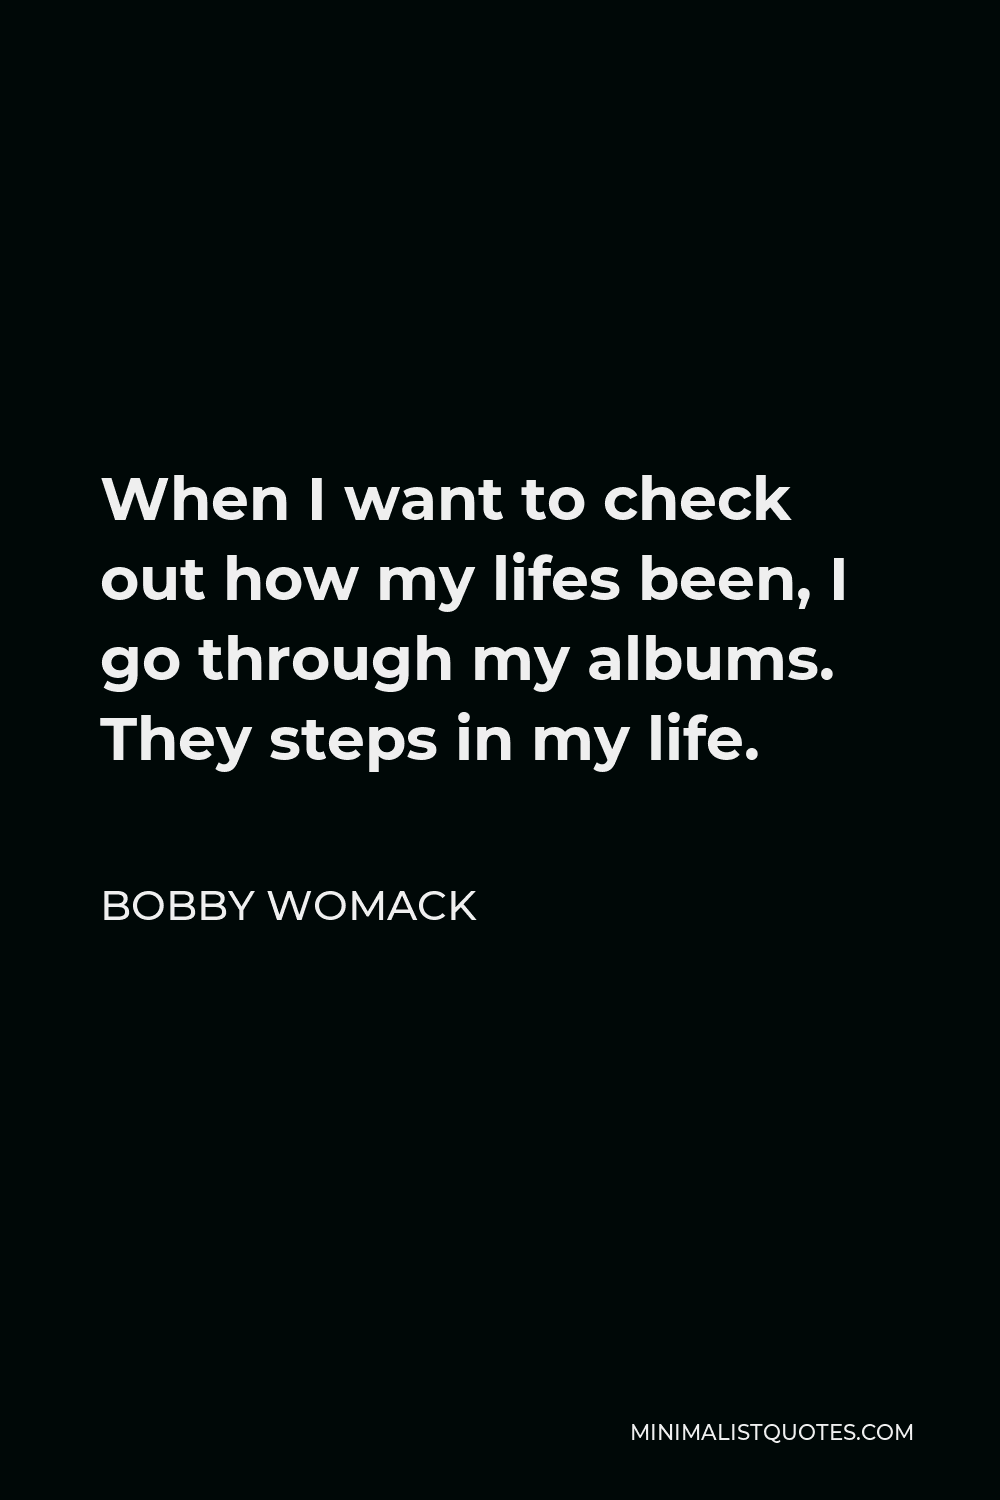 Bobby Womack Quote - When I want to check out how my lifes been, I go through my albums. They steps in my life.